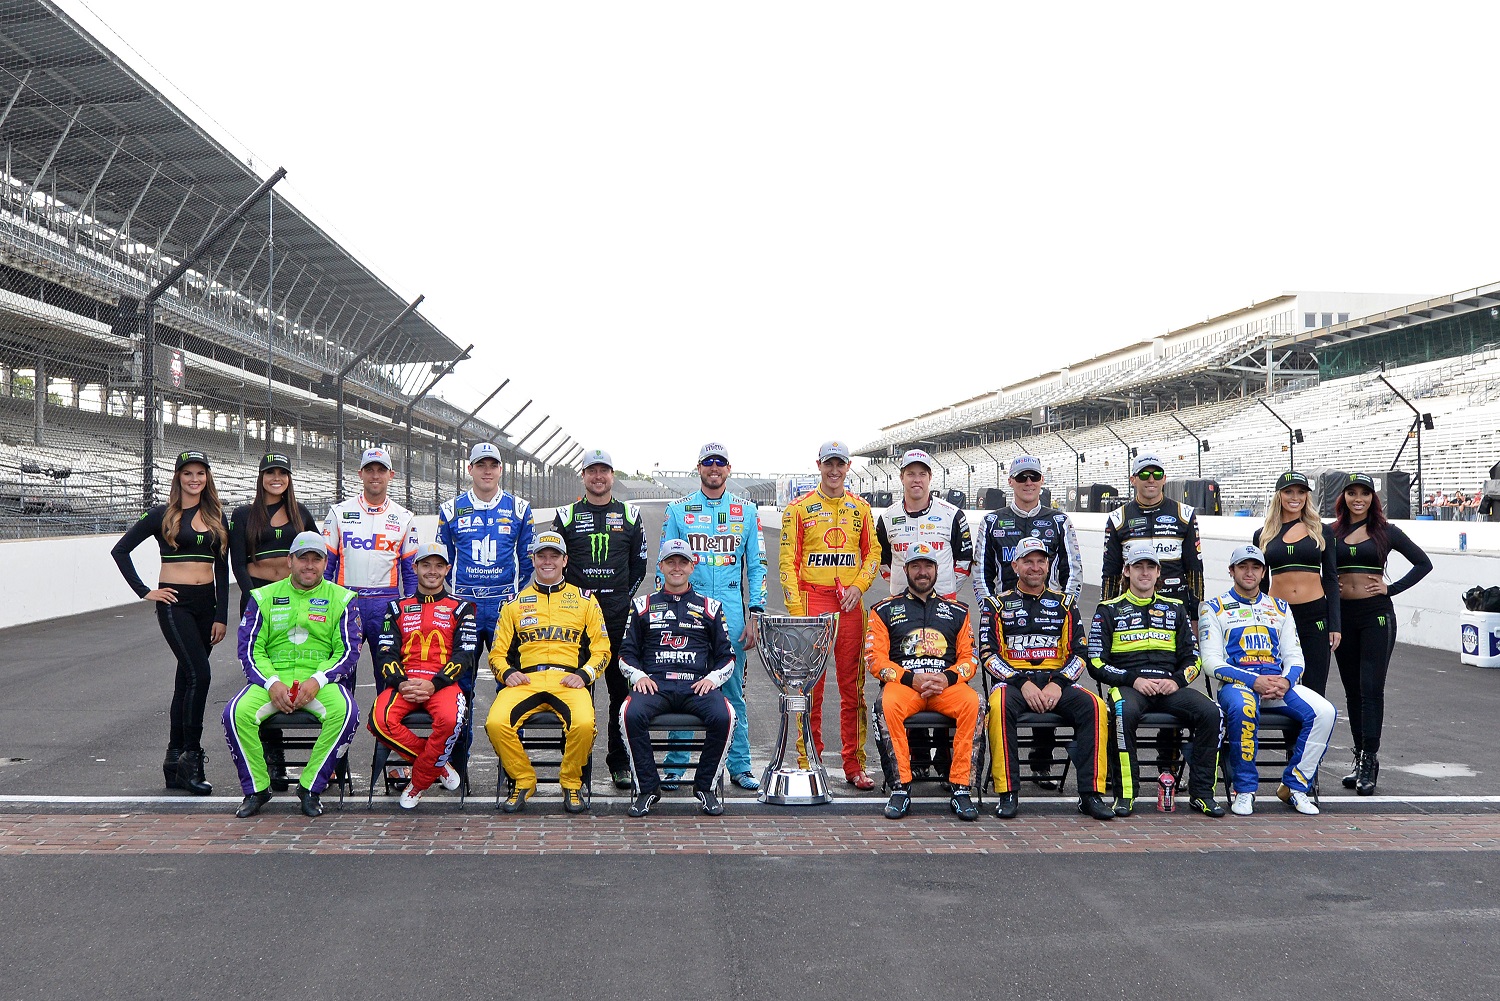 NASCAR Cup Series playoff drivers from the 2019 season on Sept. 8, 2019, at the Indianapolis Motor Speedway in Indianapolis, Indiana. | Michael Allio/Icon Sportswire via Getty Images